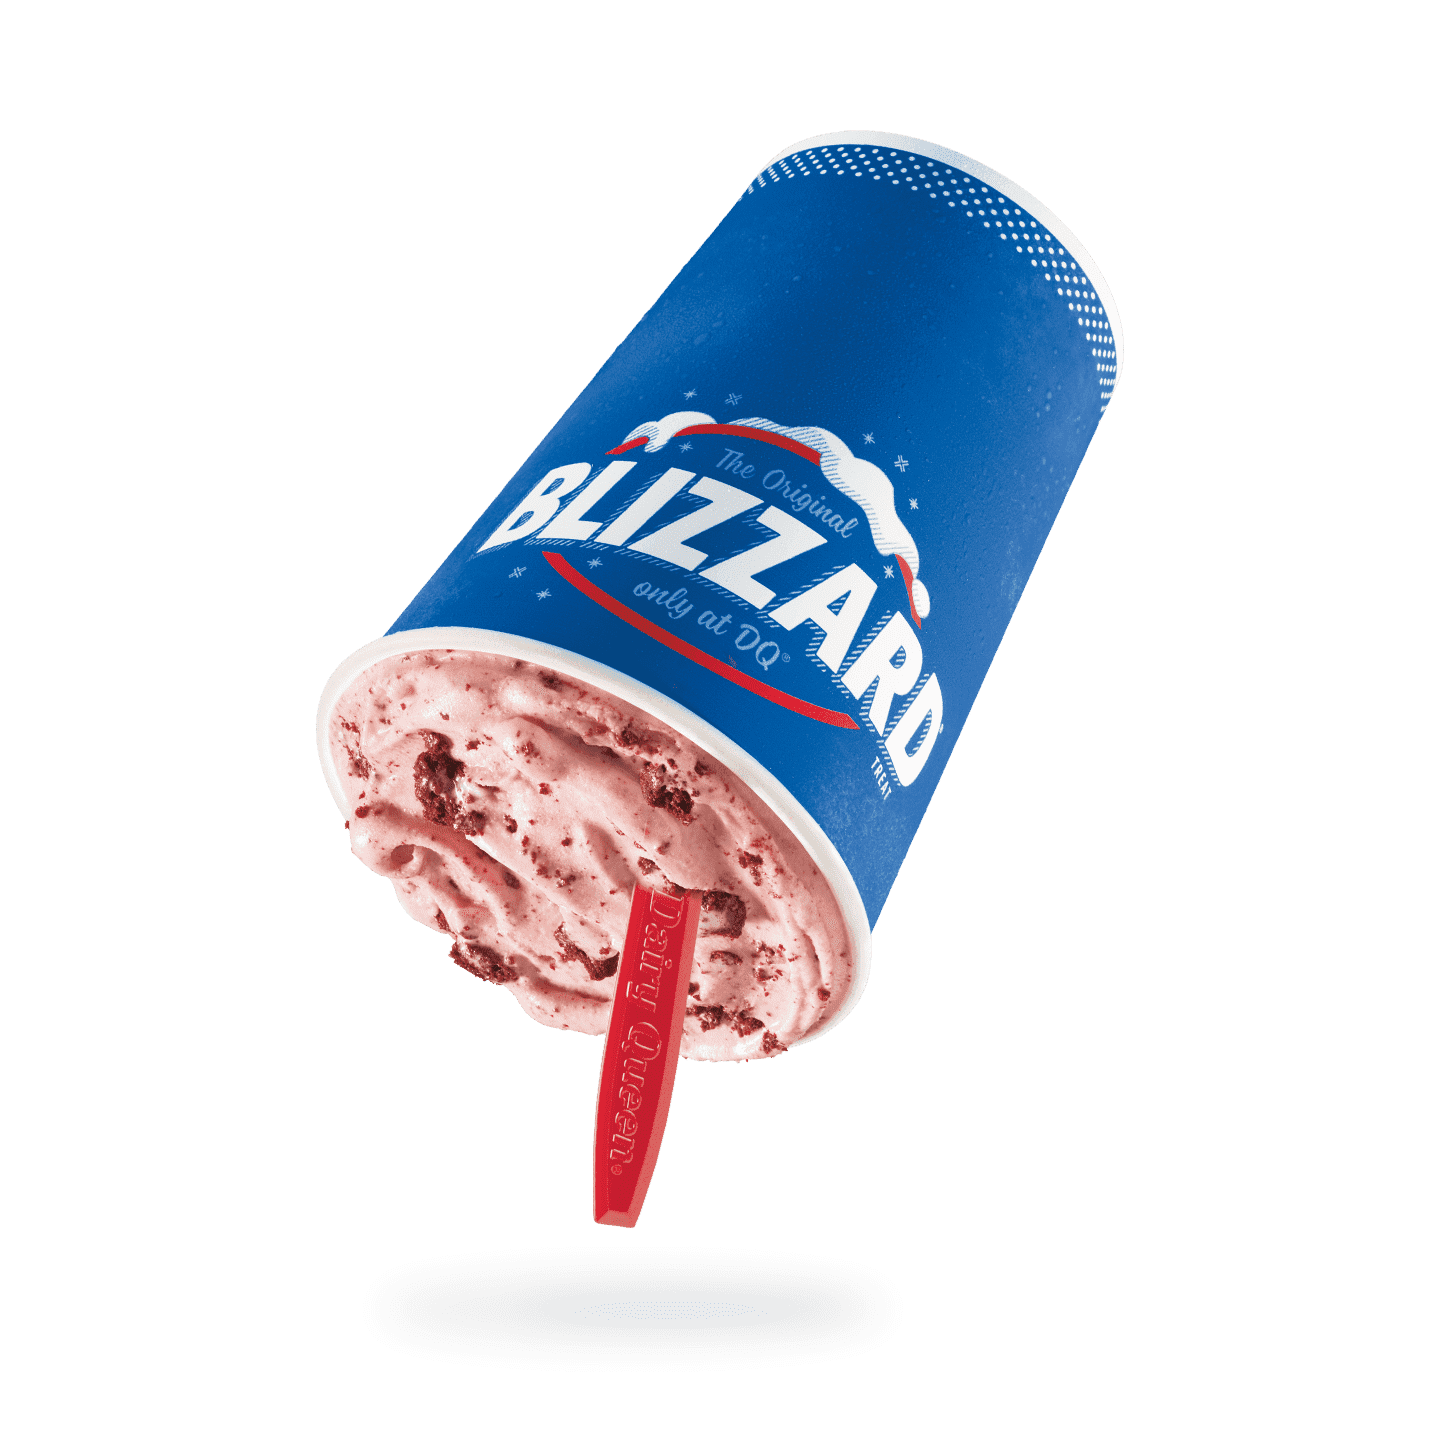 Dairy Queen® Menu Burgers, Blizzard Treats, and More